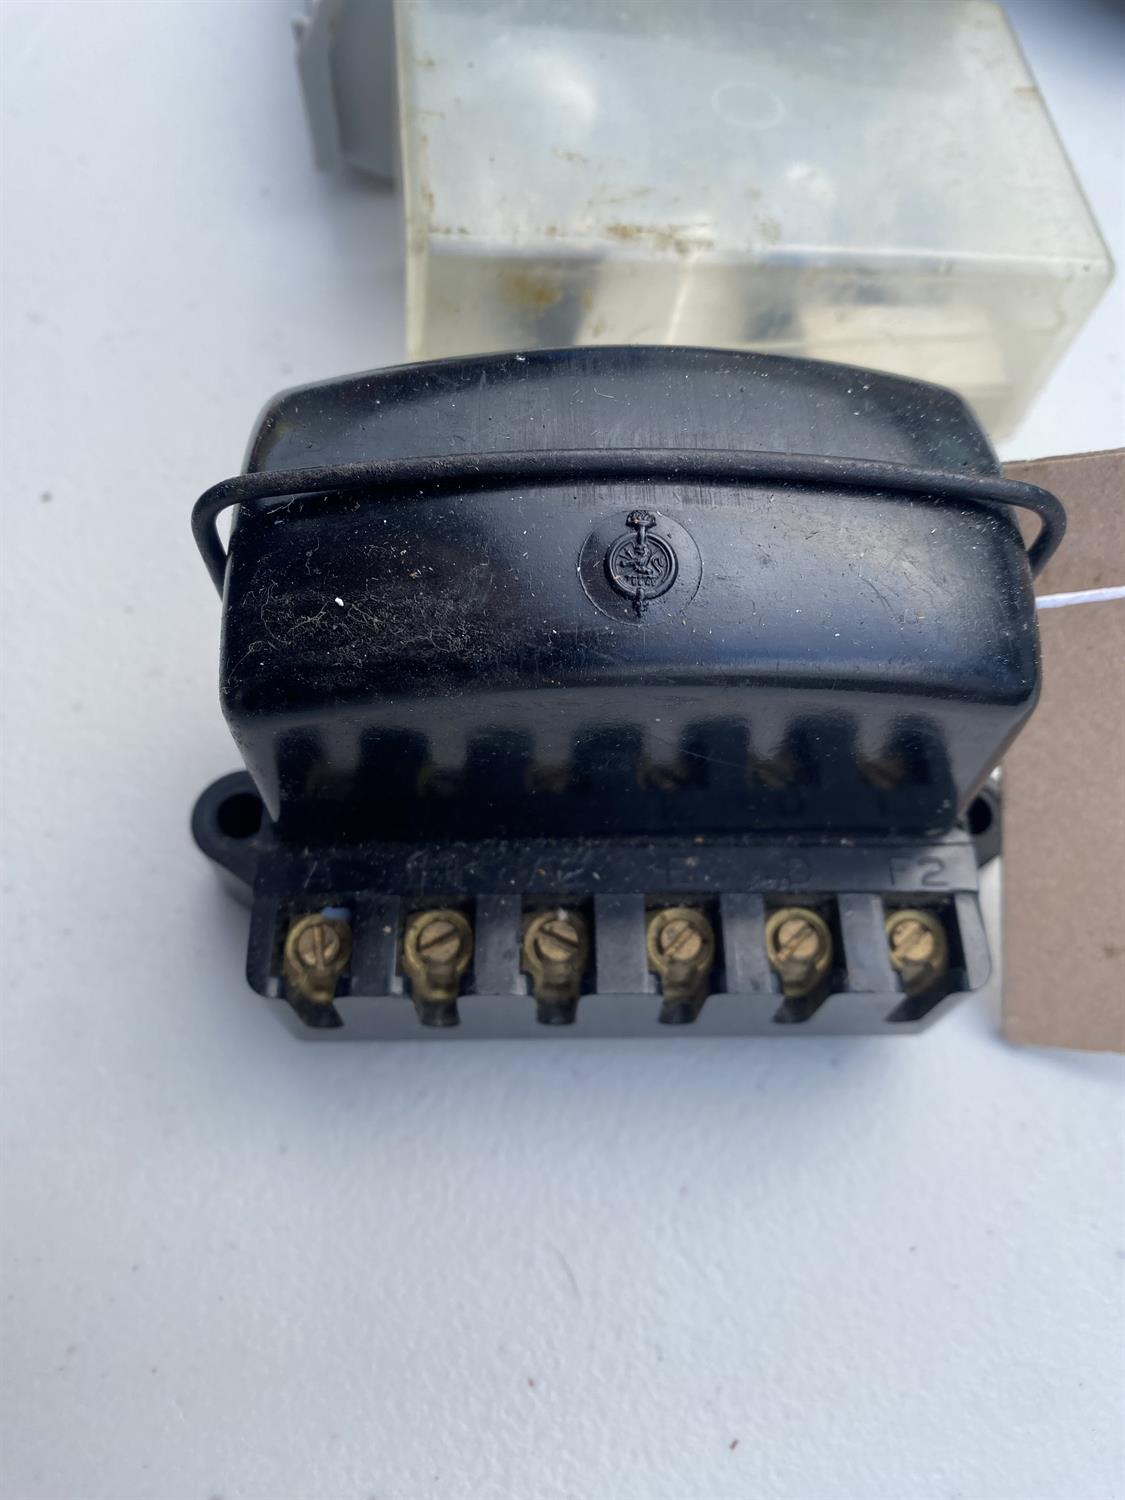 Morris 8 SU Fuel pump - not working. Including cut out fuse box and miscellaneous light bulbs. - Image 3 of 6